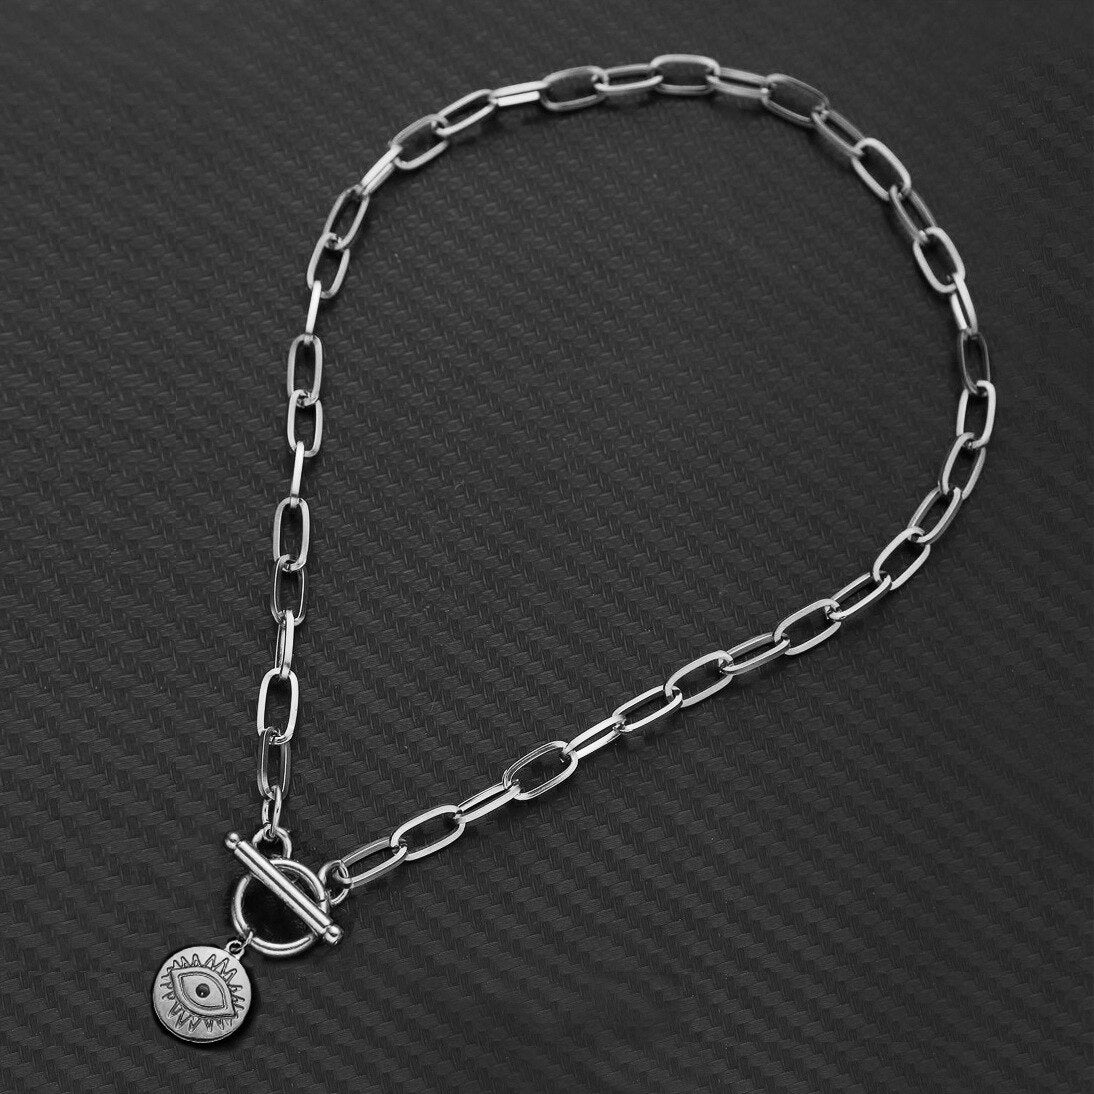 Stainless Steel Link Chain Face Evil Eyes Toggle Necklace For Women Metal Evil Eyes Coin Pendant OT Toggle Choker Collar